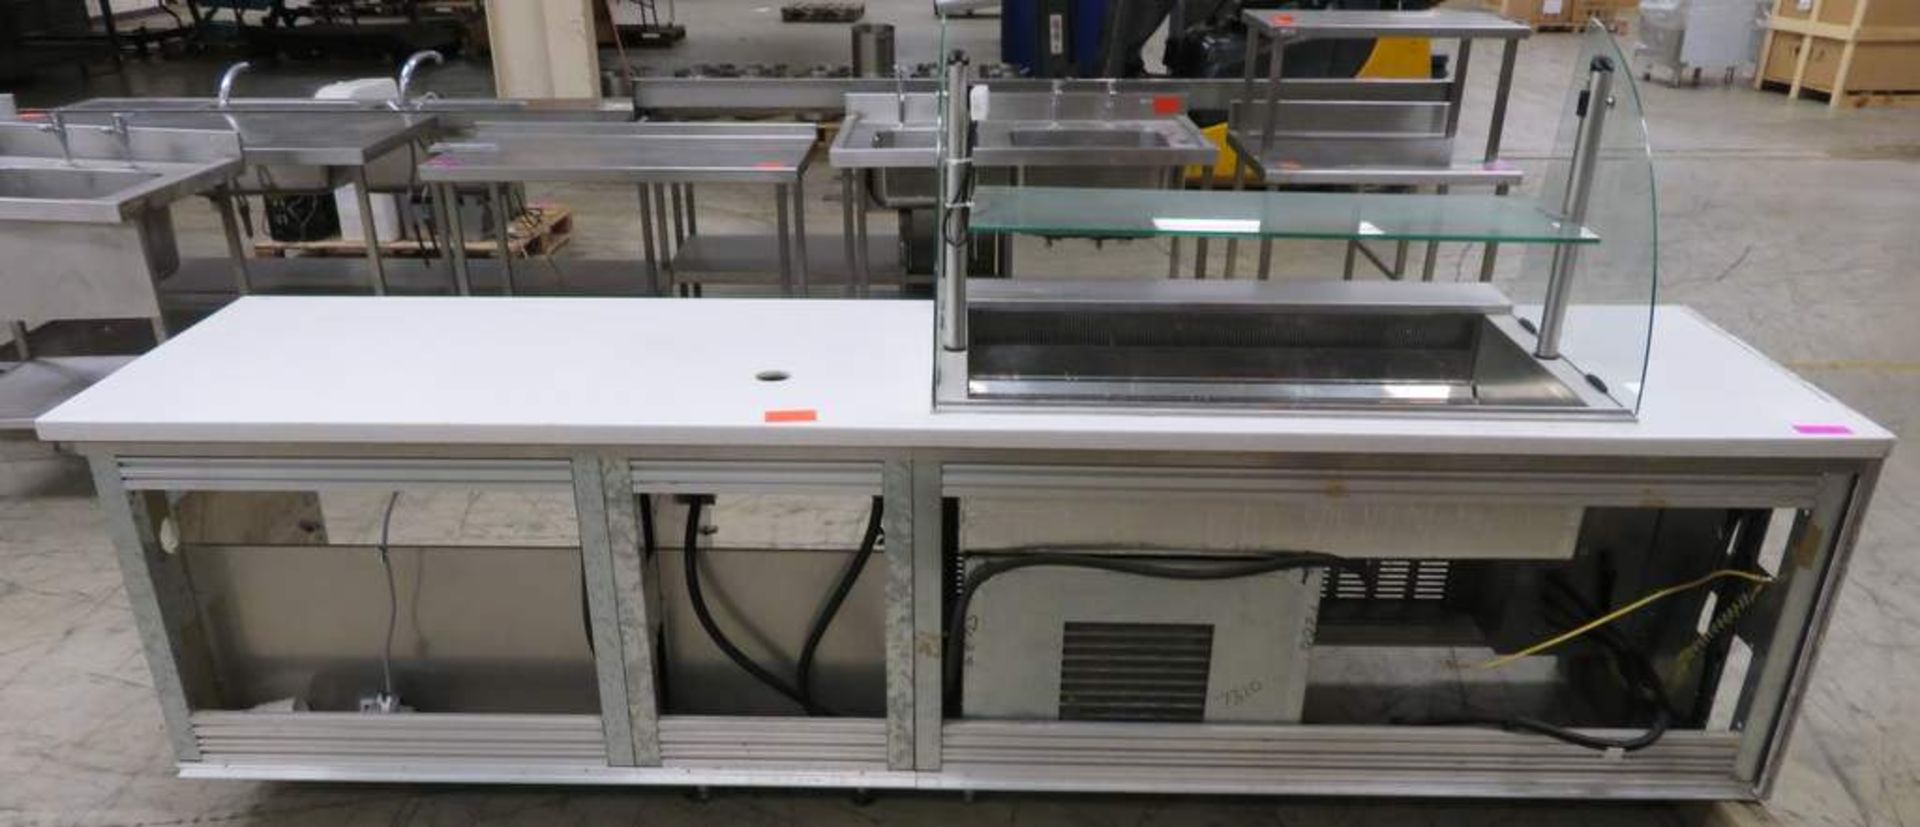 CounterLine Food Display Chiller. Dimensions: 3050x760x1460mm (LxWxH) - Image 2 of 9